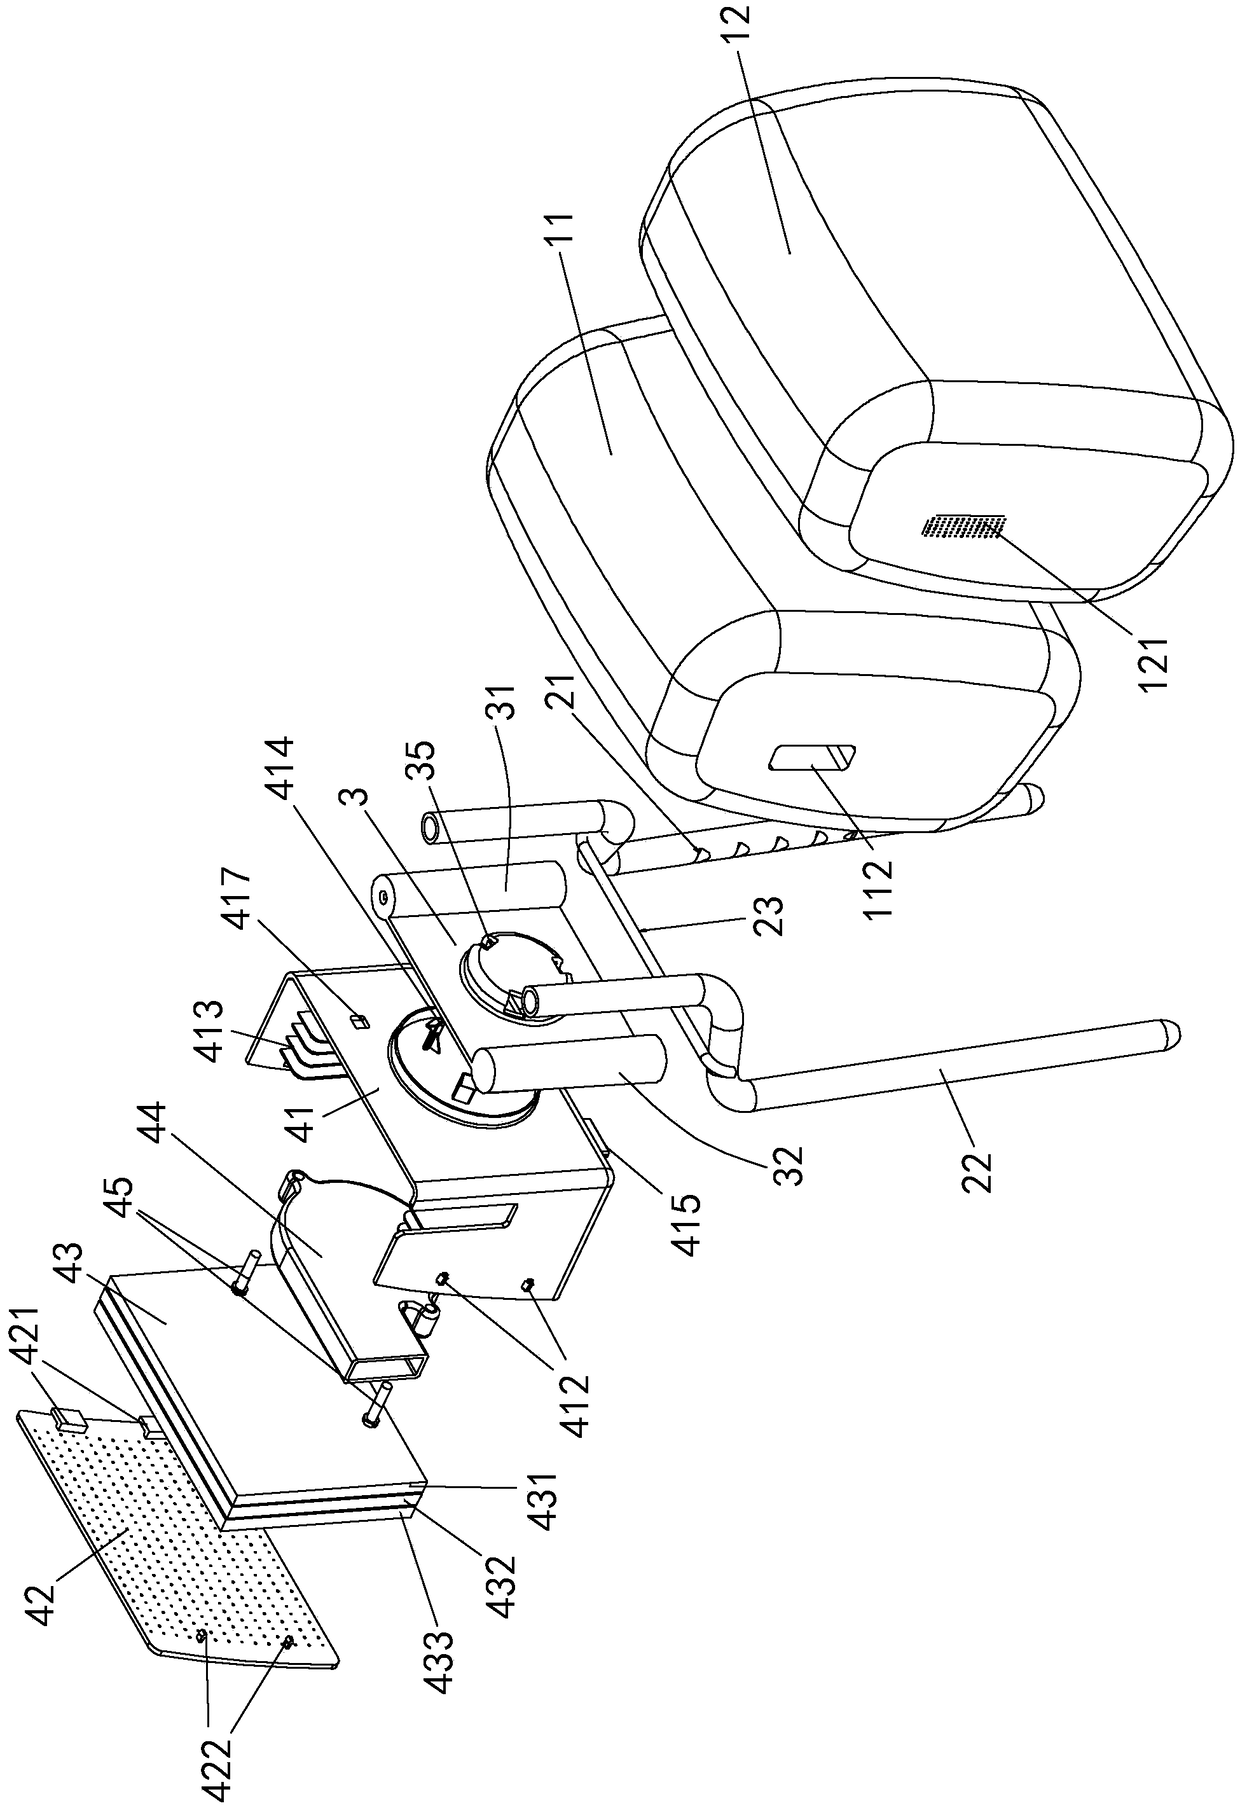 Integrated automotive seat headrest with air purification function